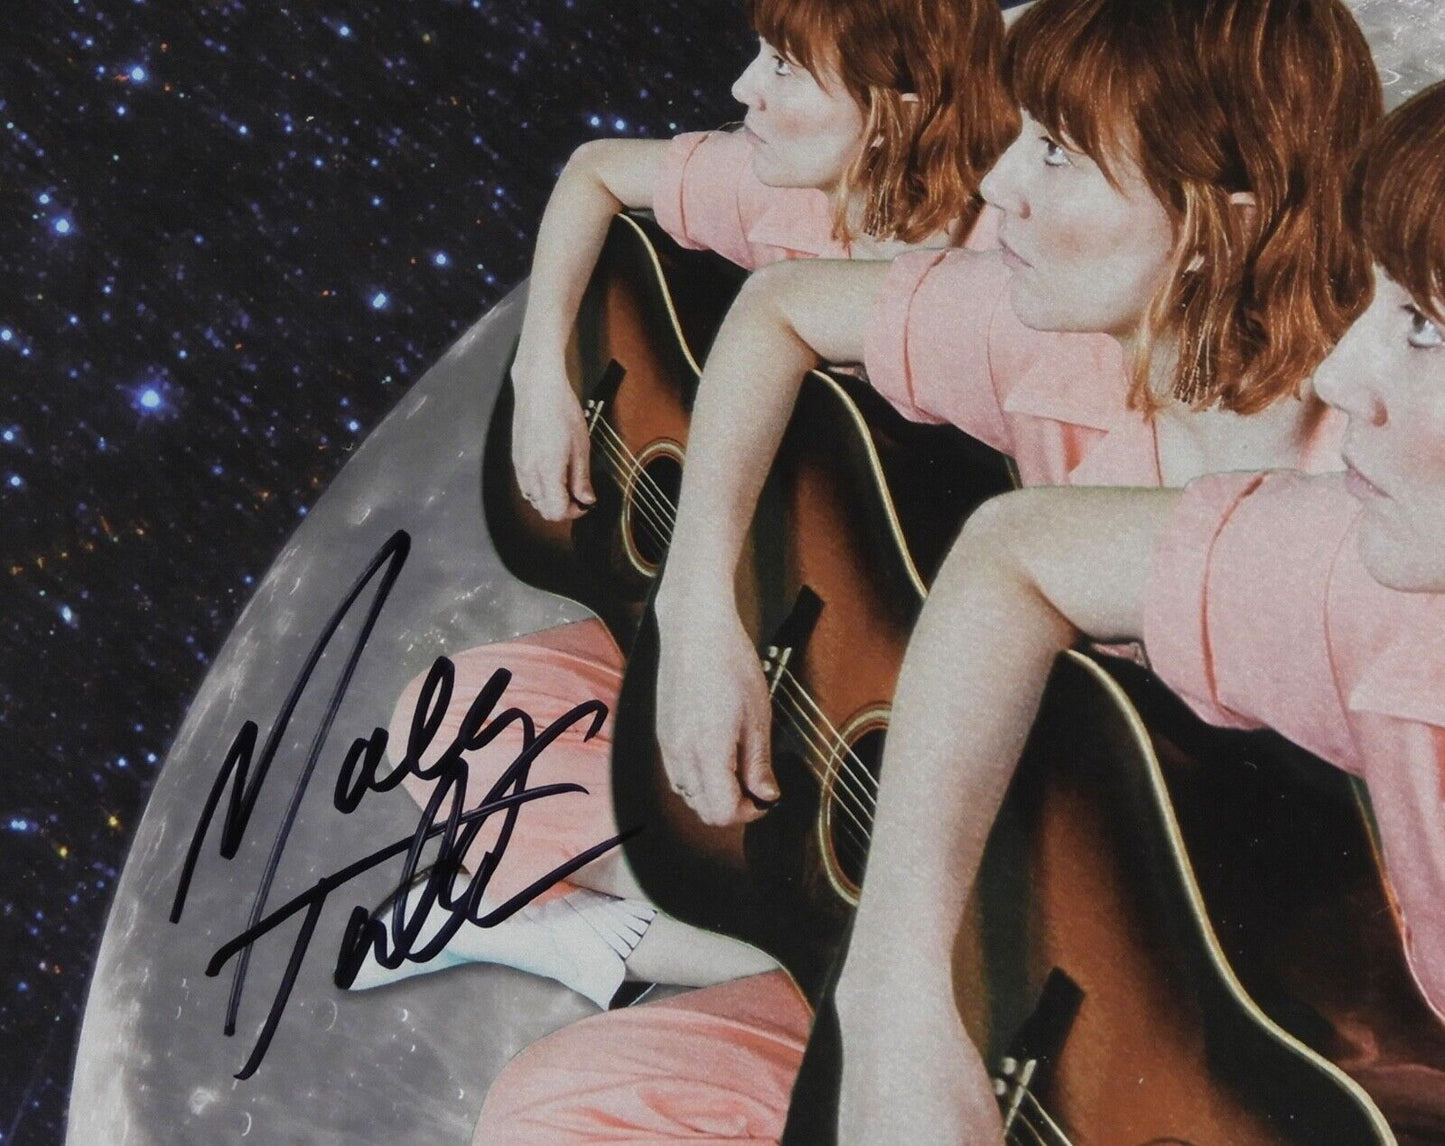 Molly Tuttle JSA Signed Autograph Album Record Vinyl But I'd Rather Be With You